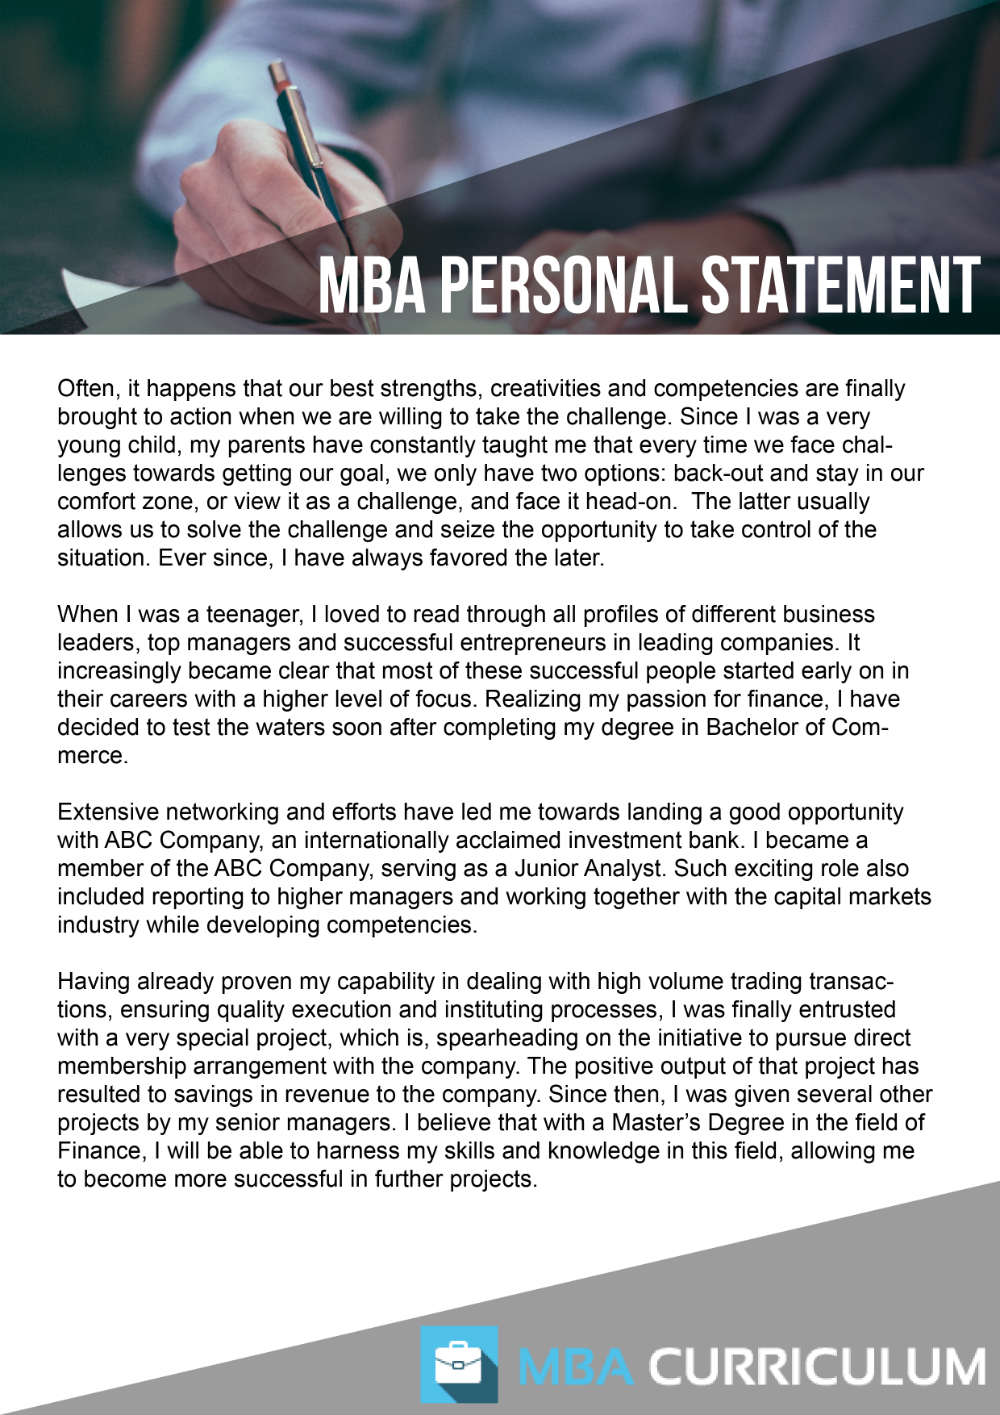 How To Write A Successful MBA Personal Statement